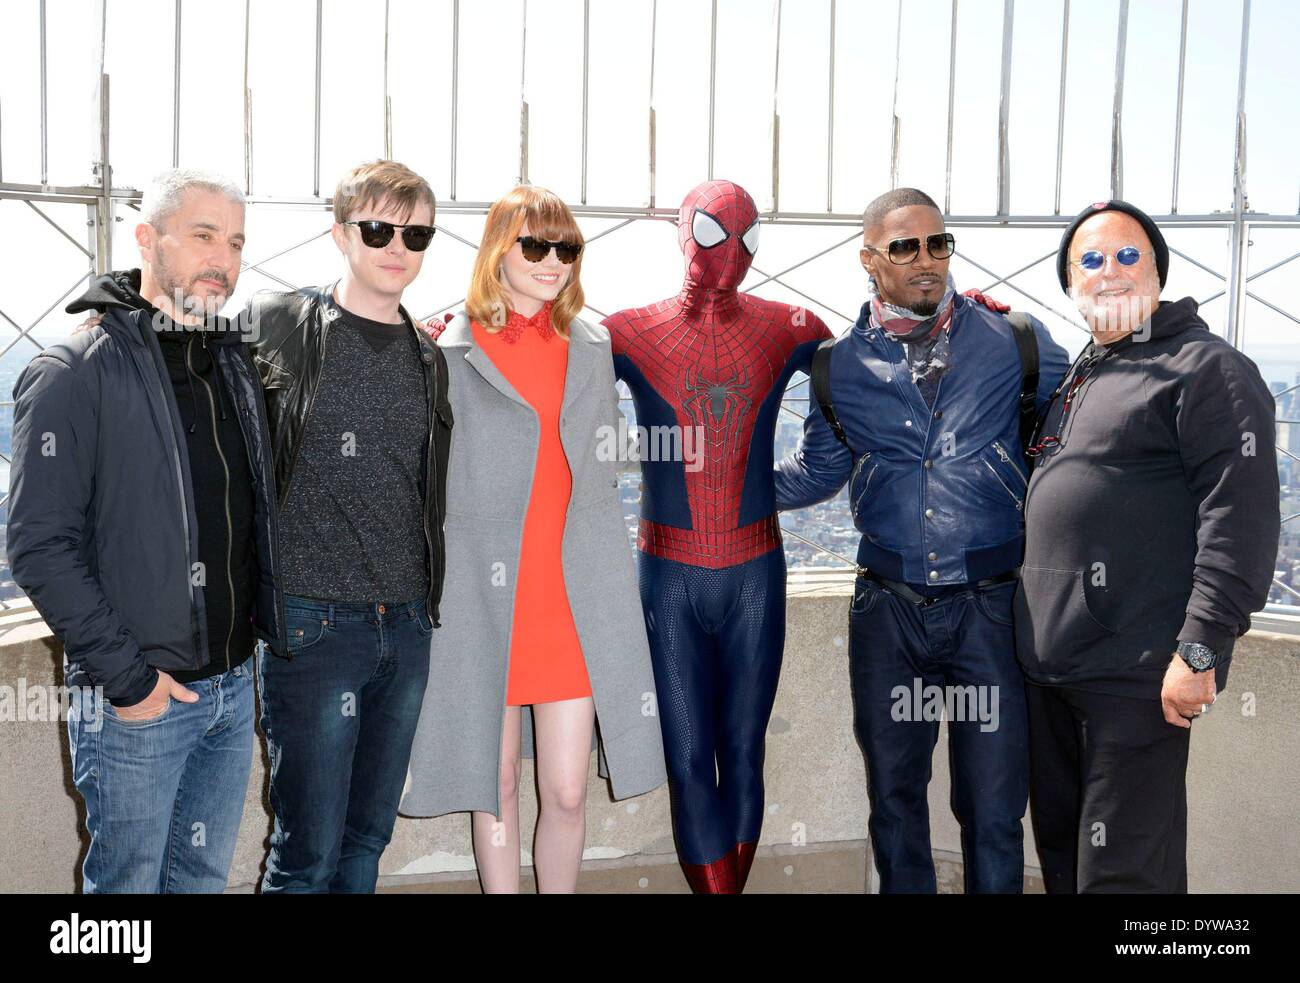 The cast of 'The Amazing Spider-Man 2' light the Empire State Building  Featuring: Matthew Tolmach